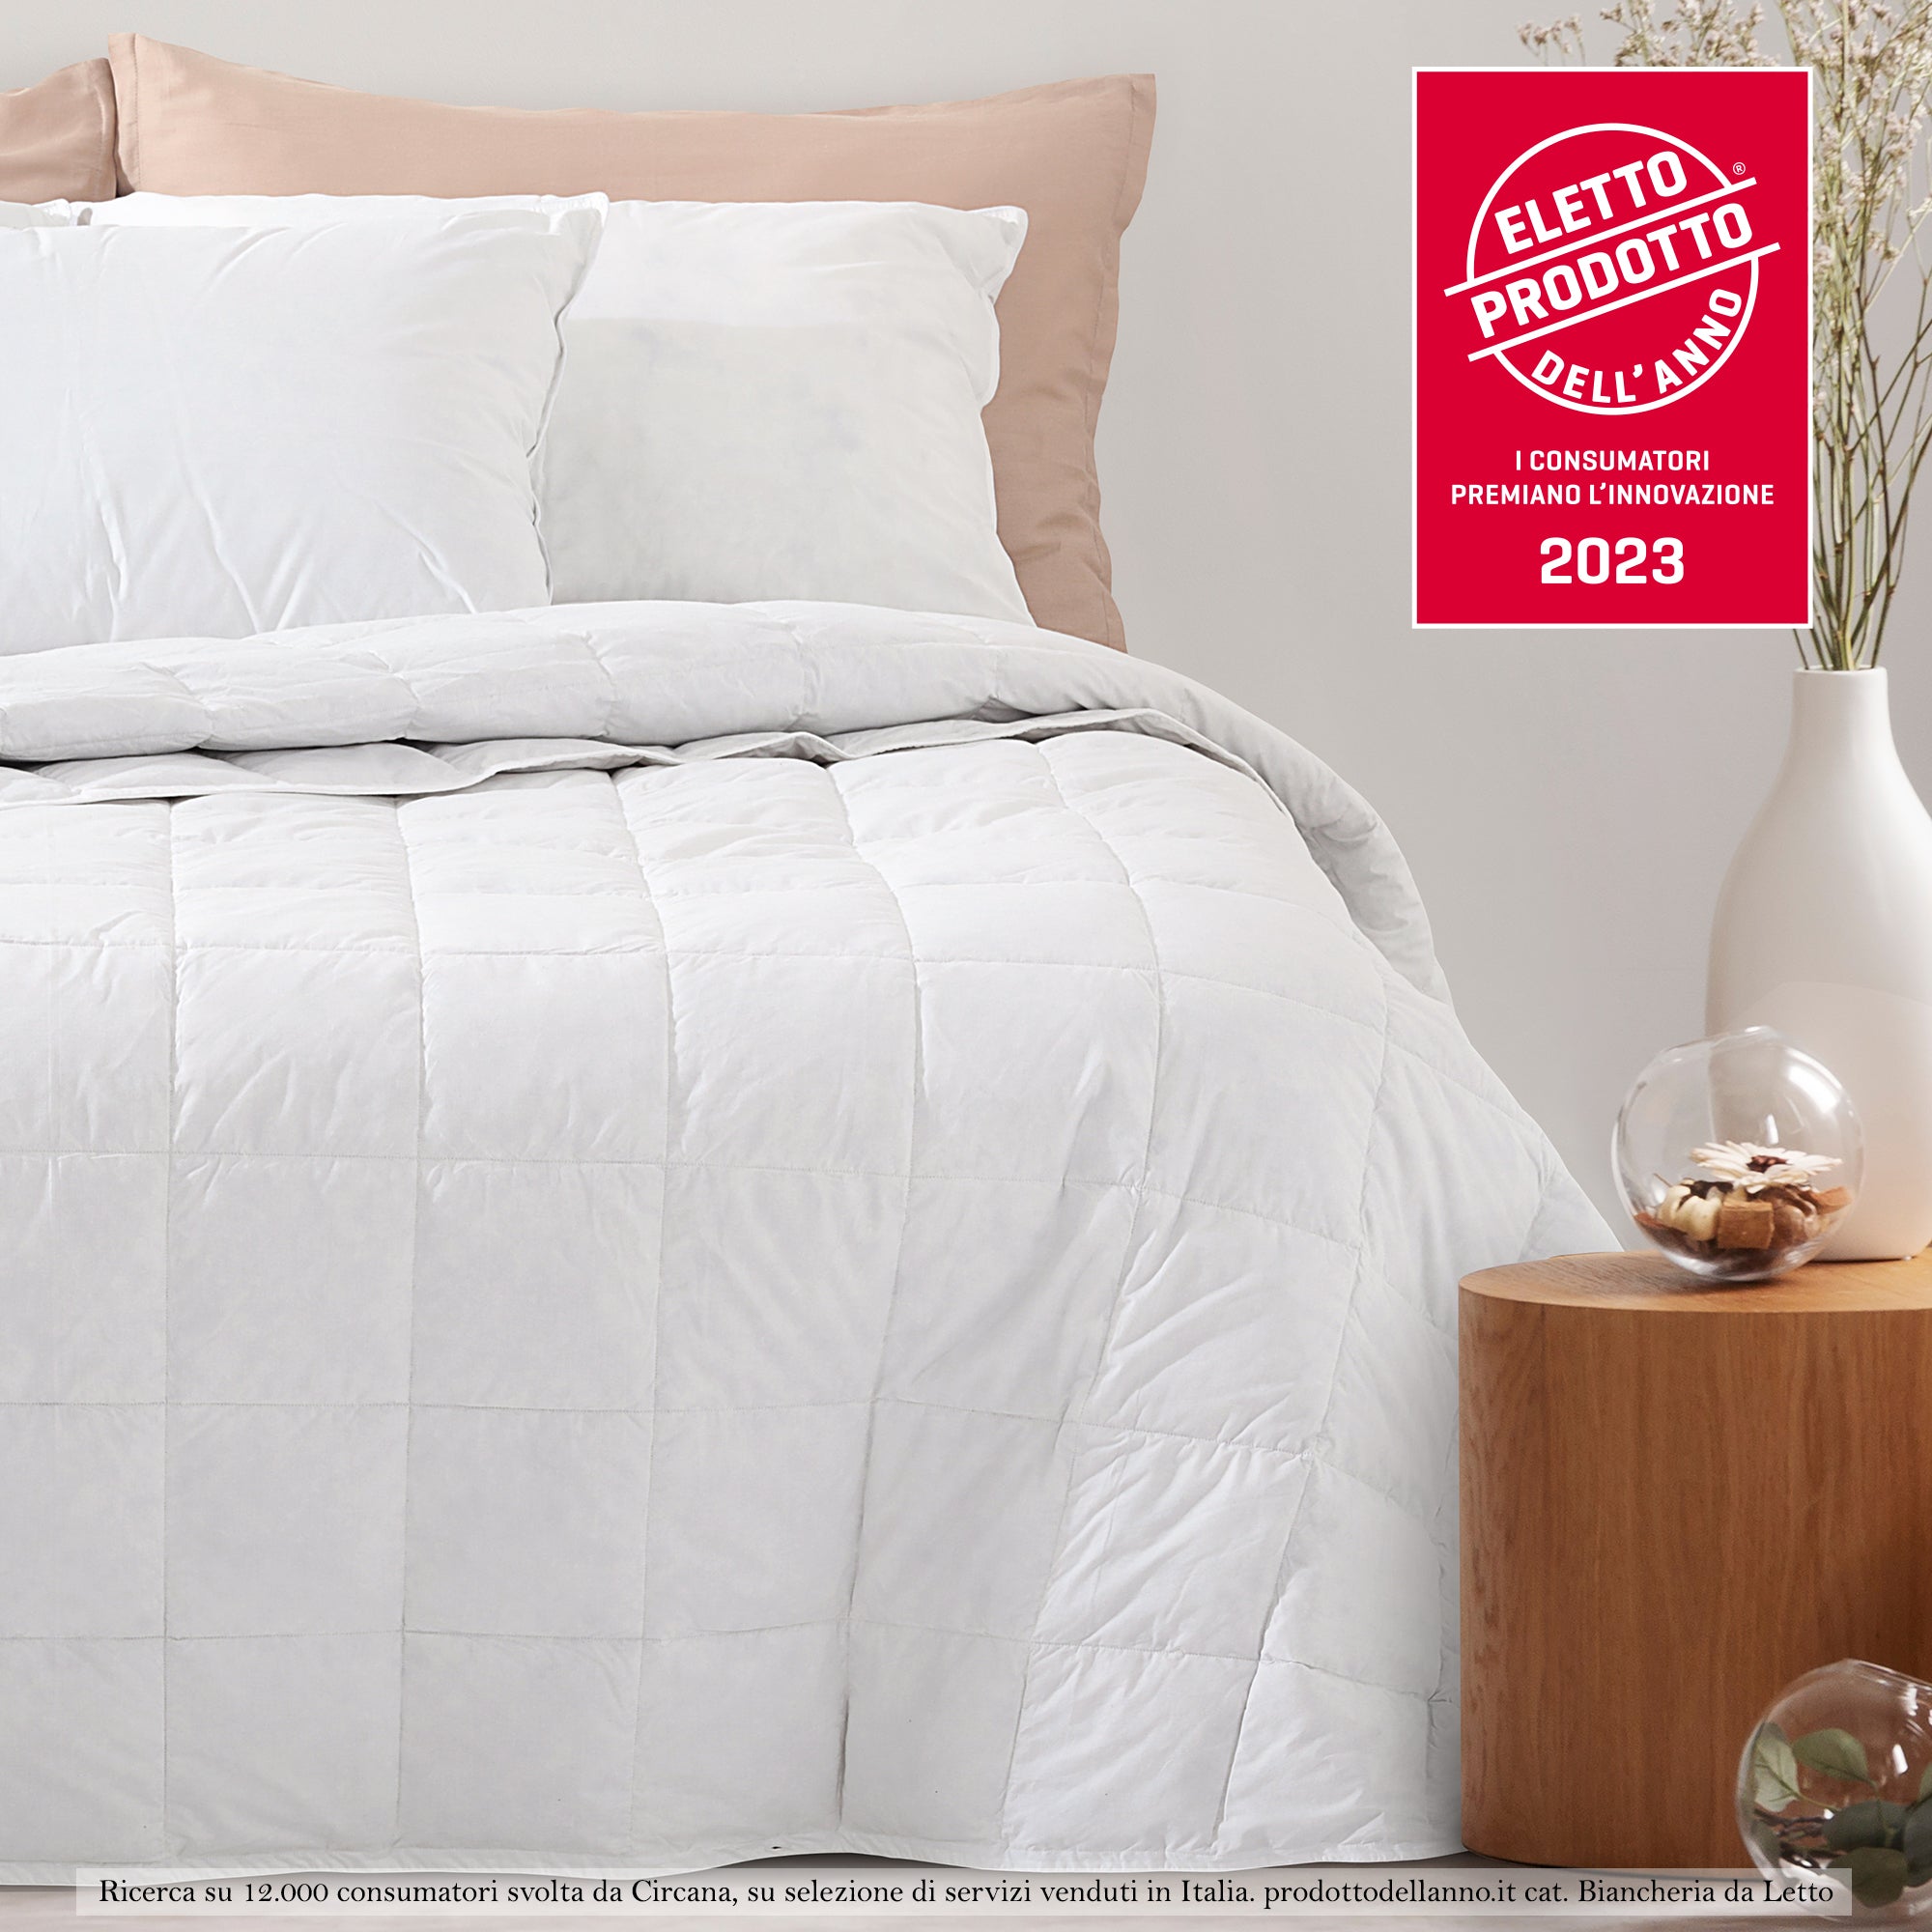 Polar 2* Summer - Spring Duvet in 100% Goose Down | Elected Product of the Year 2023